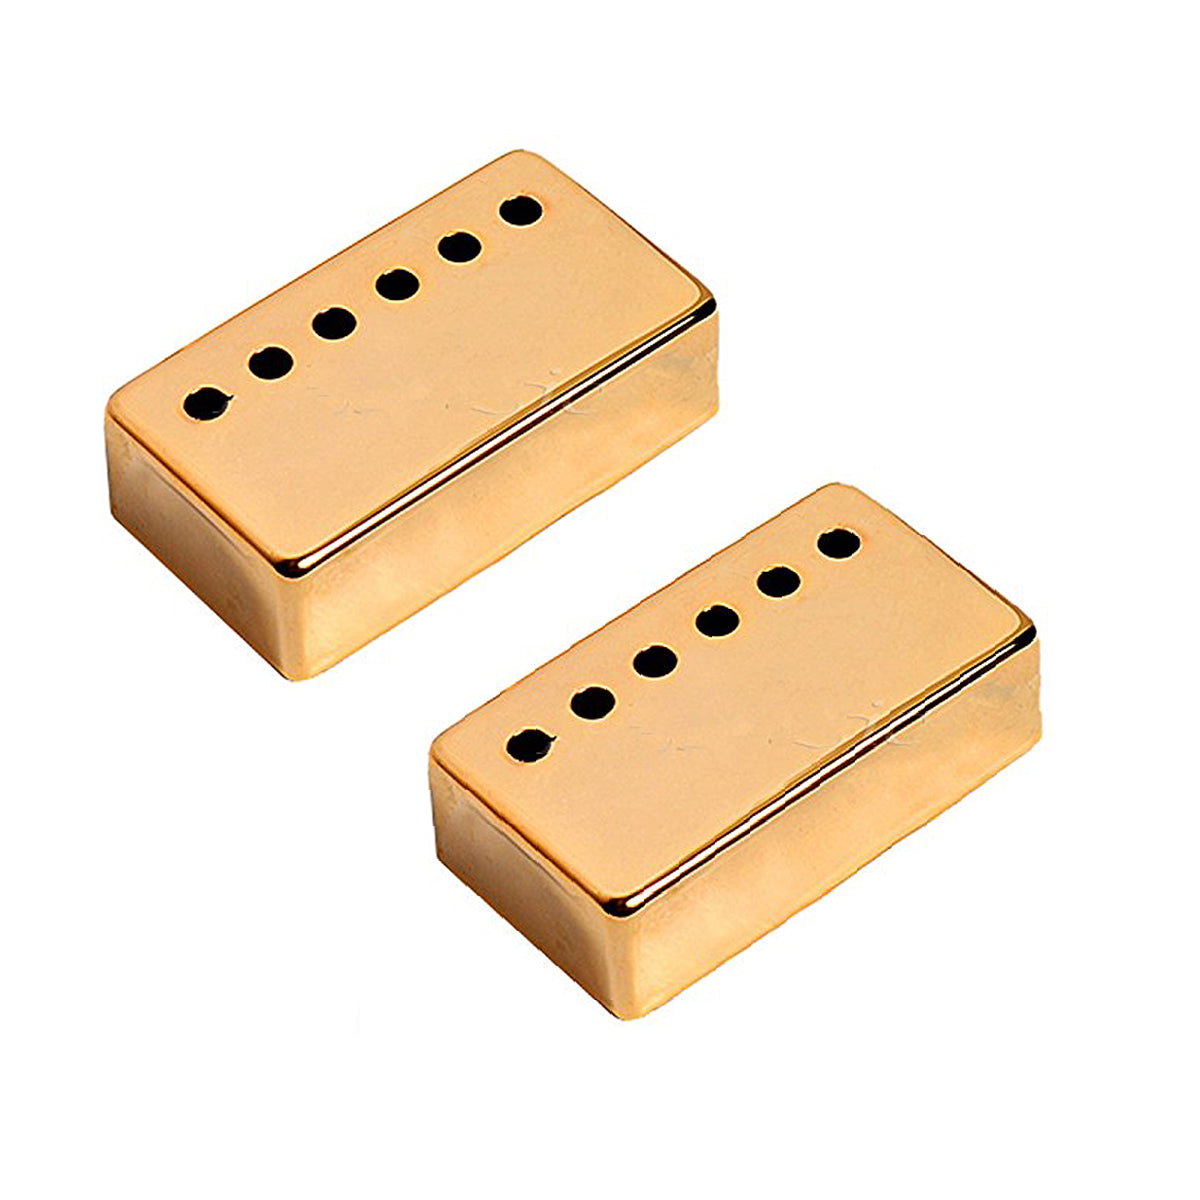 Musiclily 50mm and 52mm Metal Guitar Humbucker Pickup Covers Set,Gold